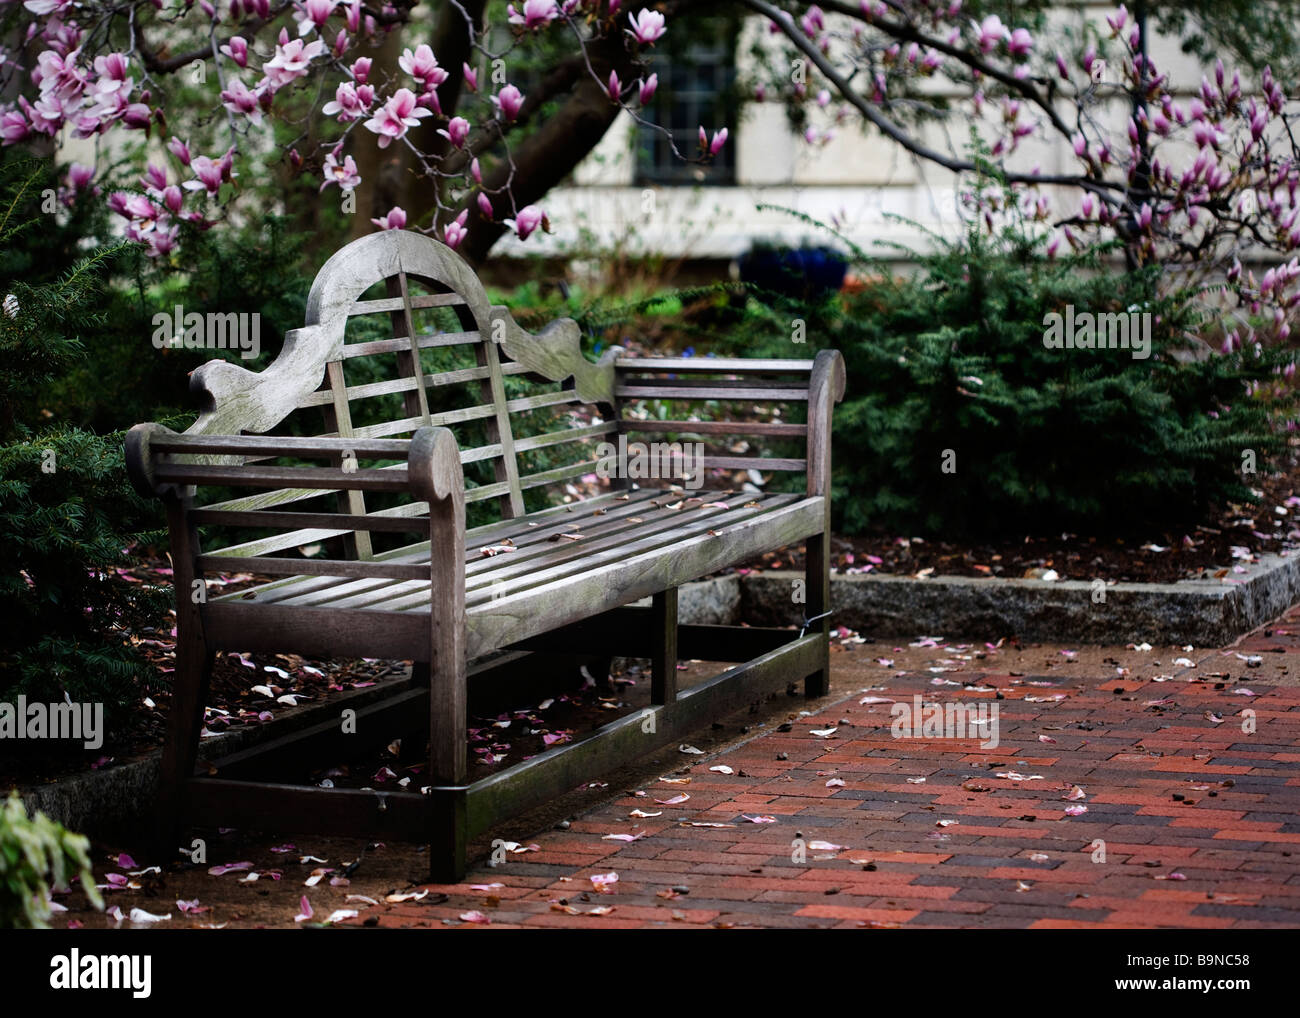 Ornate wooden bench Stock Photo